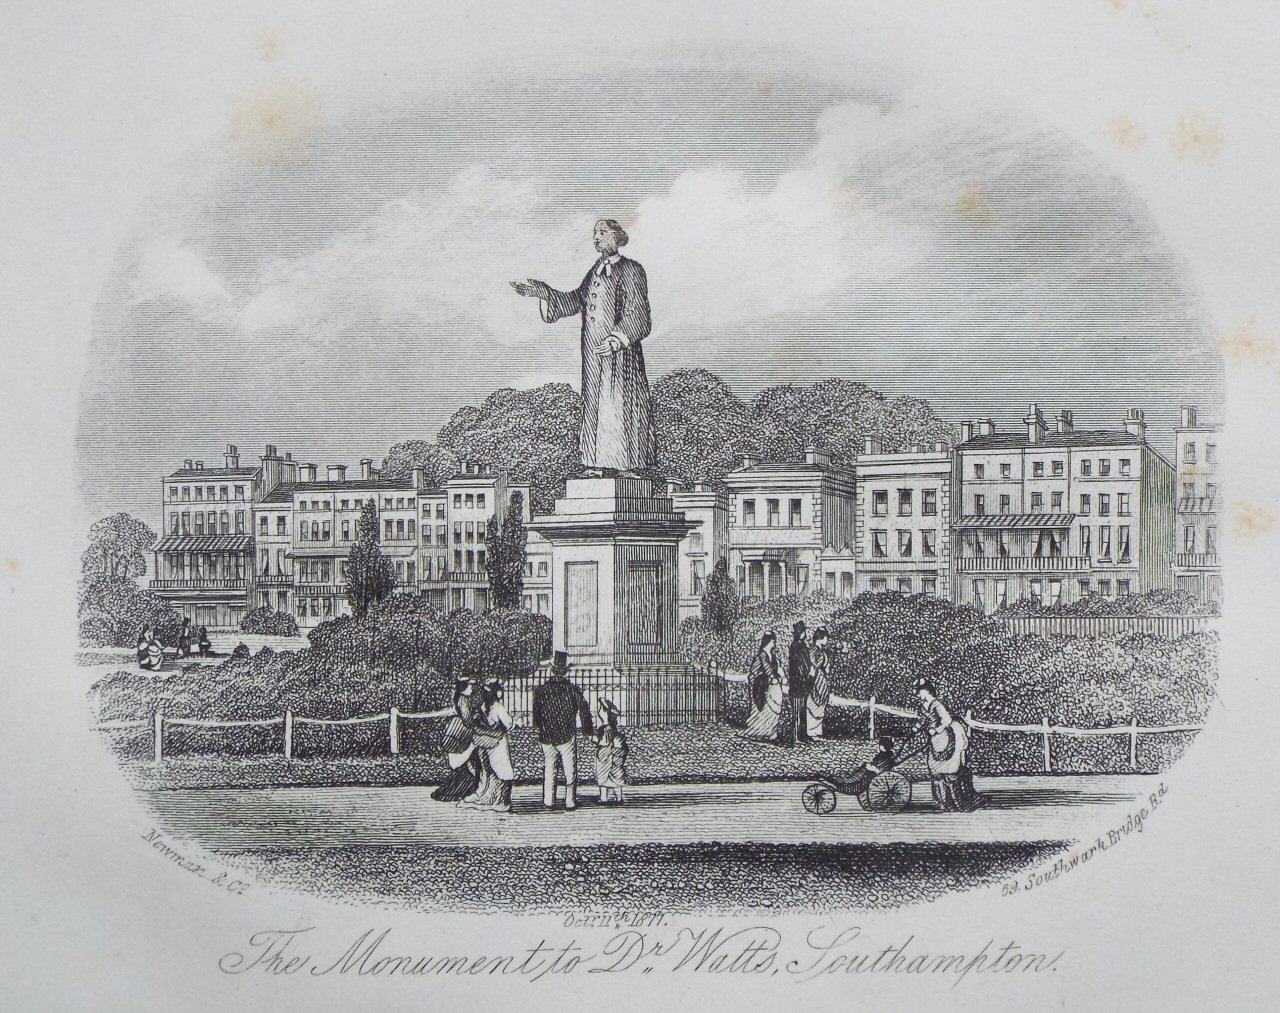 Steel Vignette - The Monument to Dr.Watts, Southampton - Newman